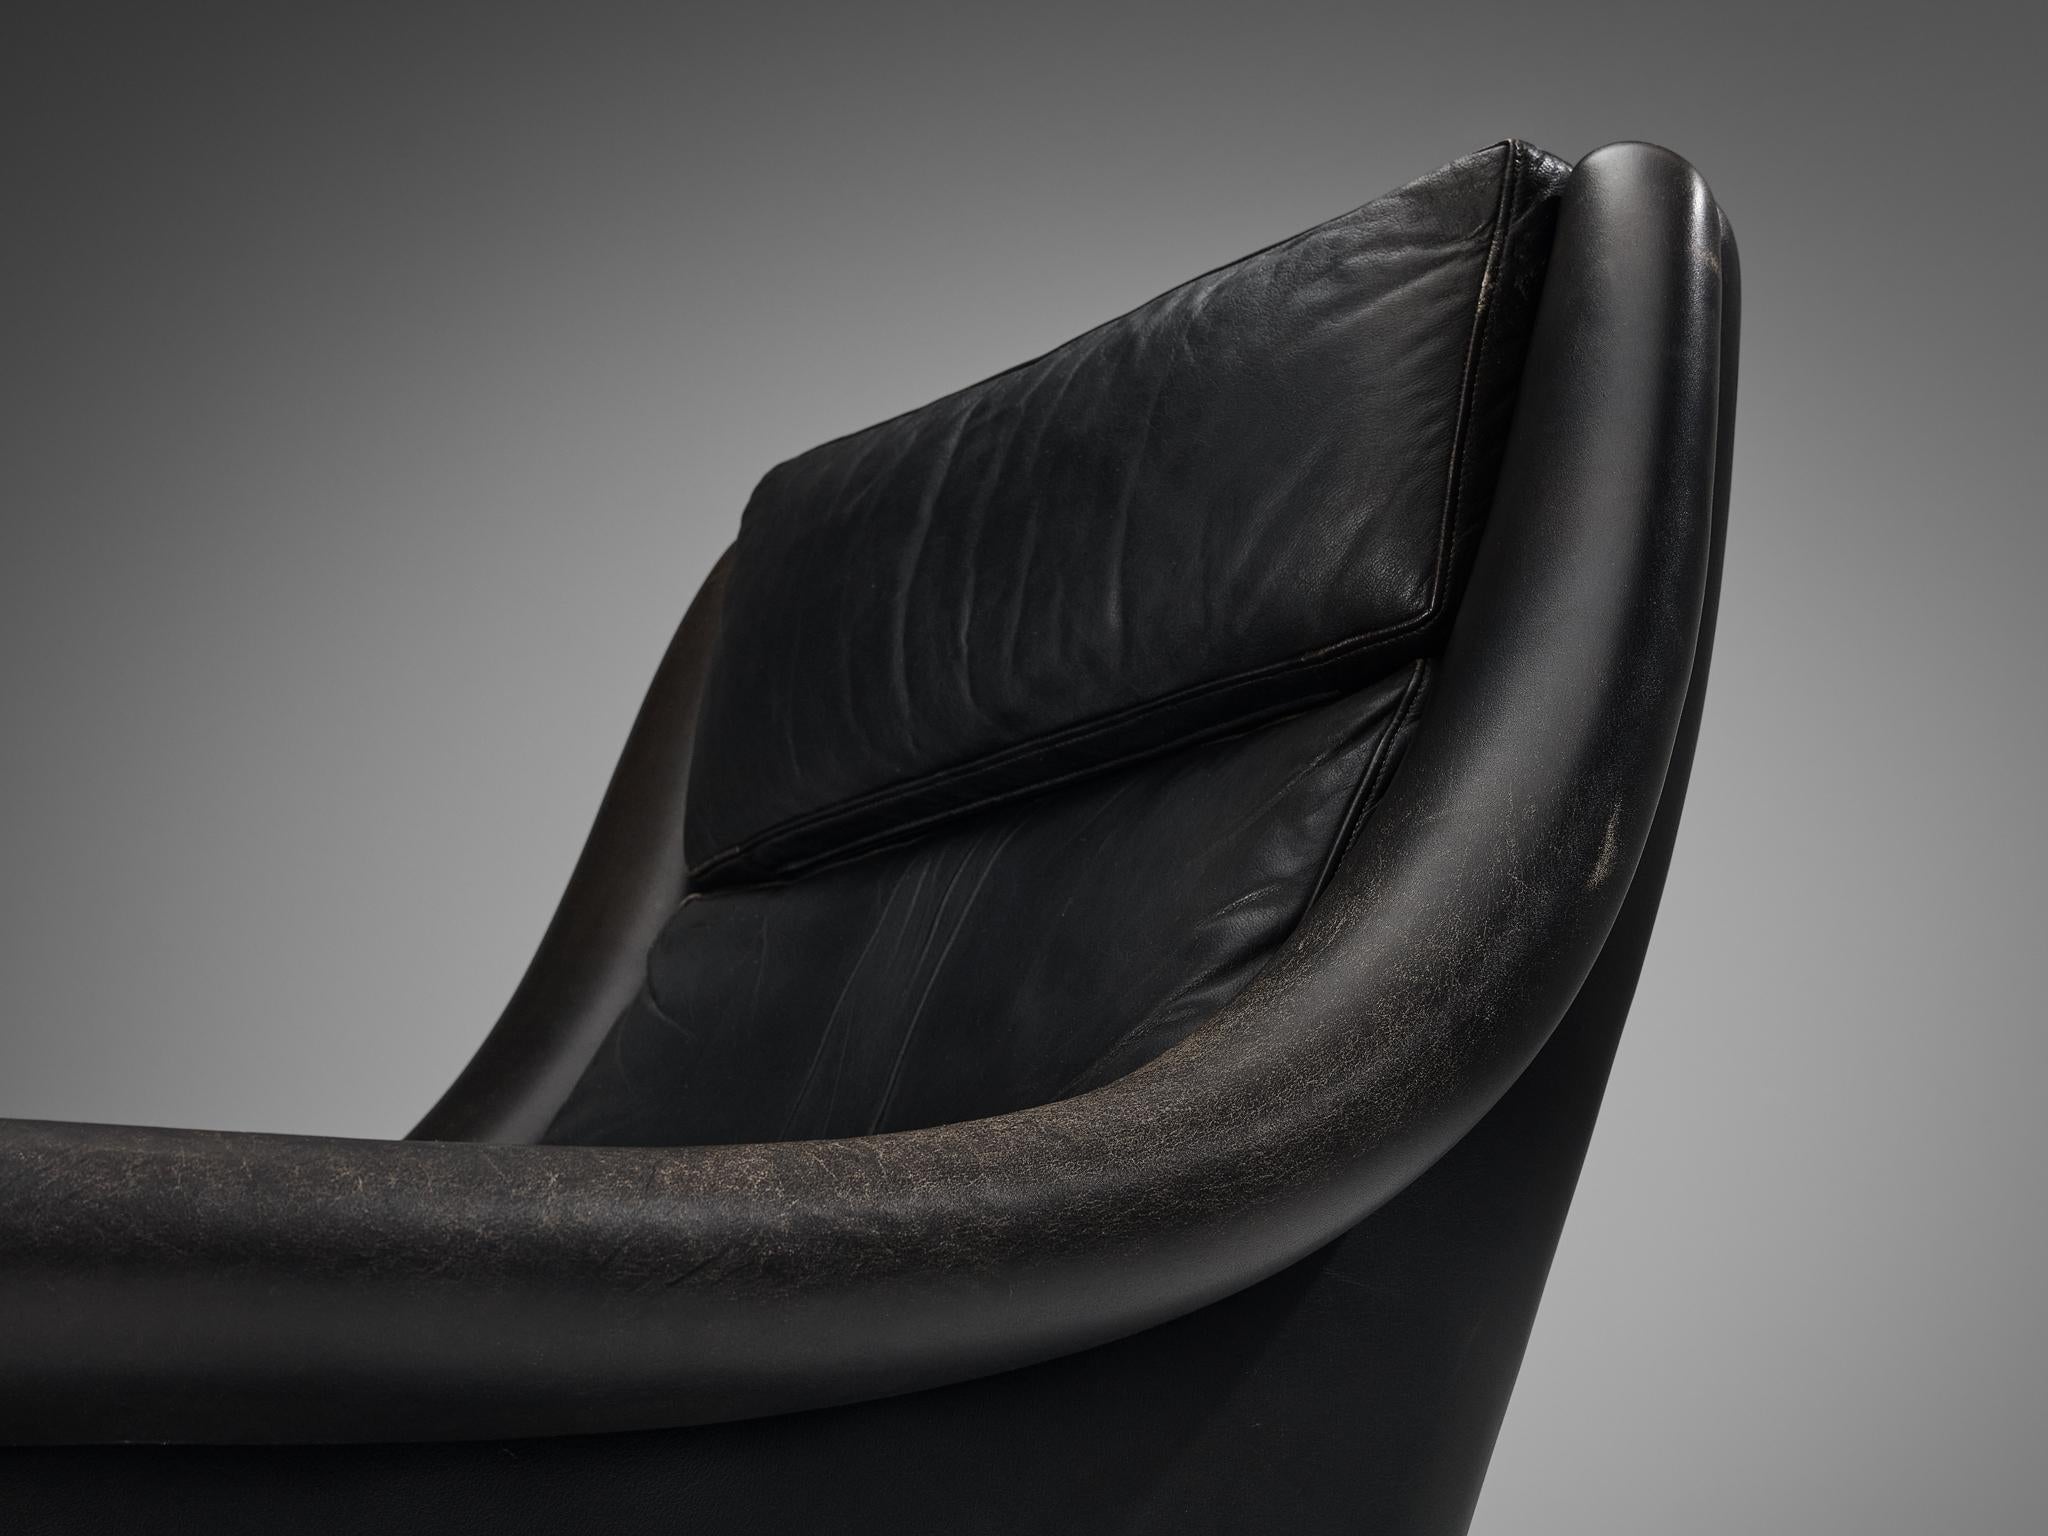 Danish Lounge Chair in Black Leather and Teak